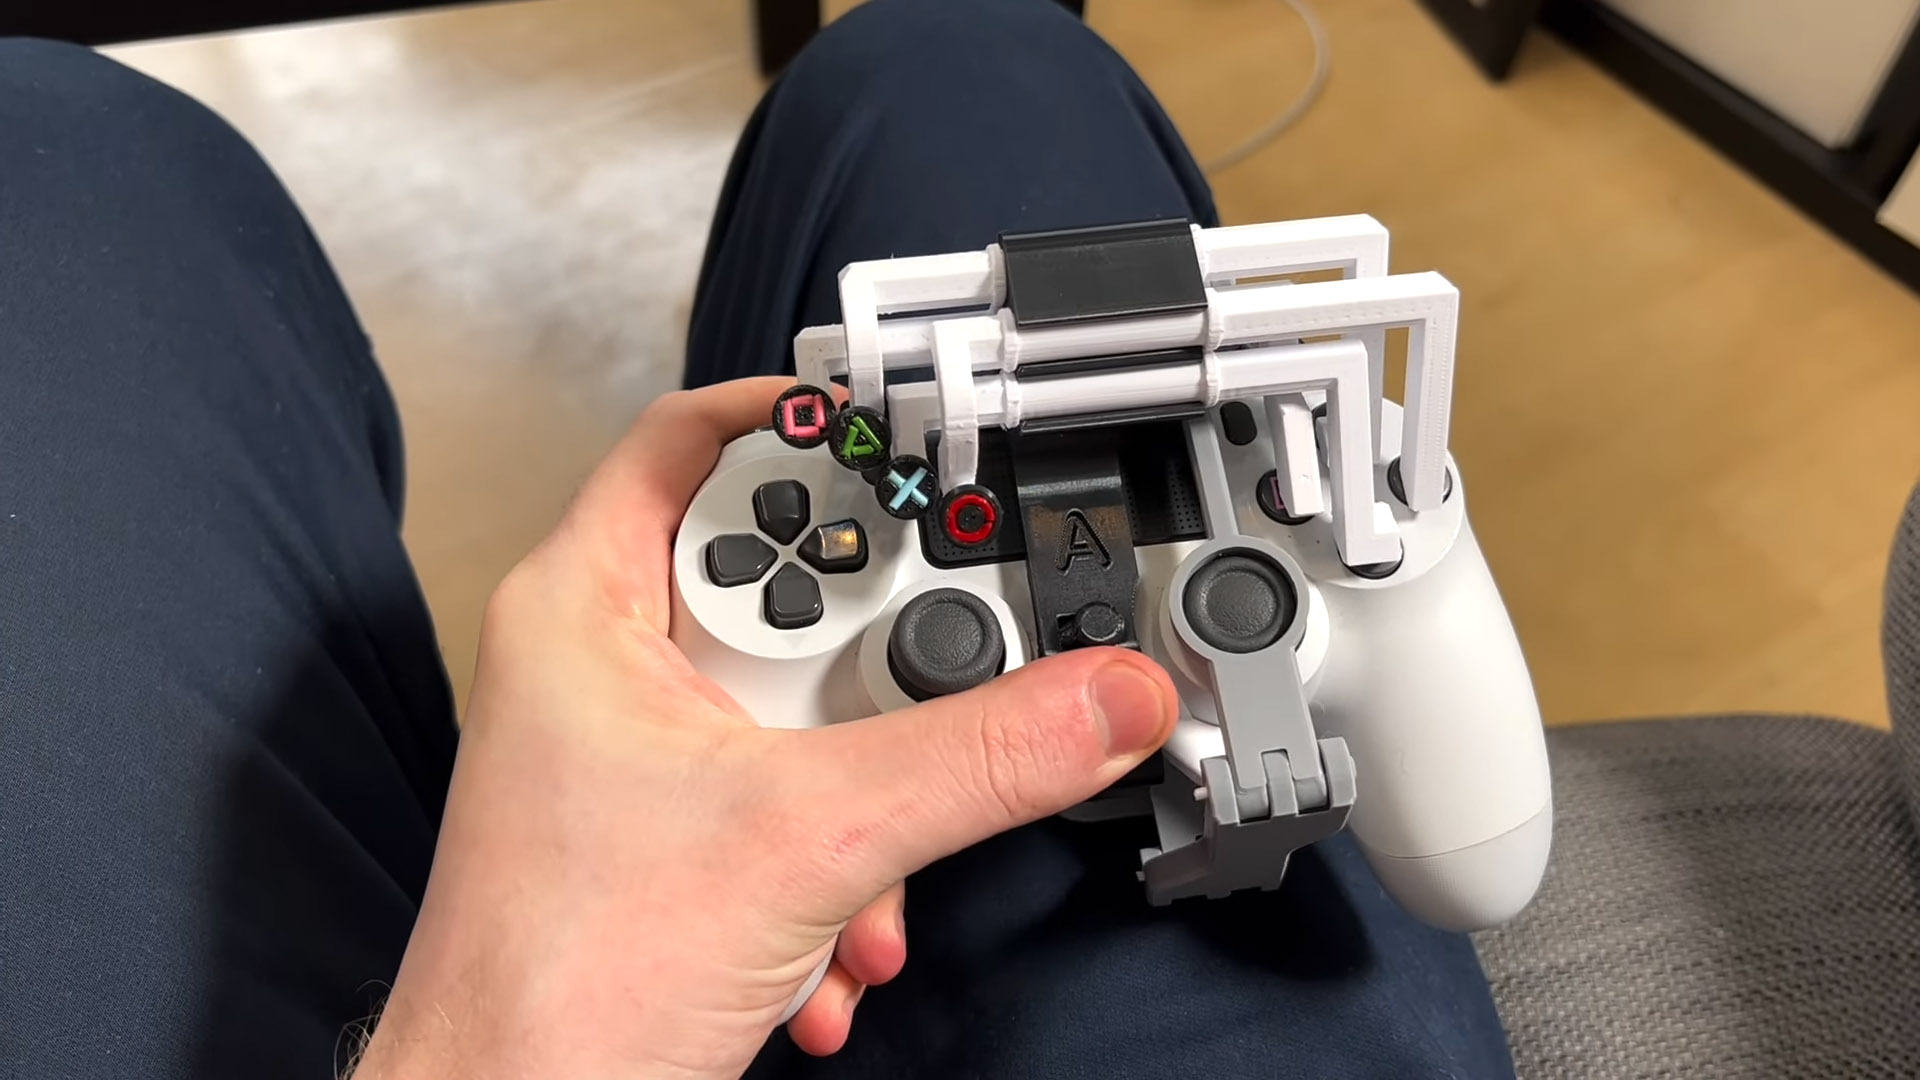 3D-printed PlayStation controller mod allows one-handed PS4 and PS5 gaming  - NotebookCheck.net News